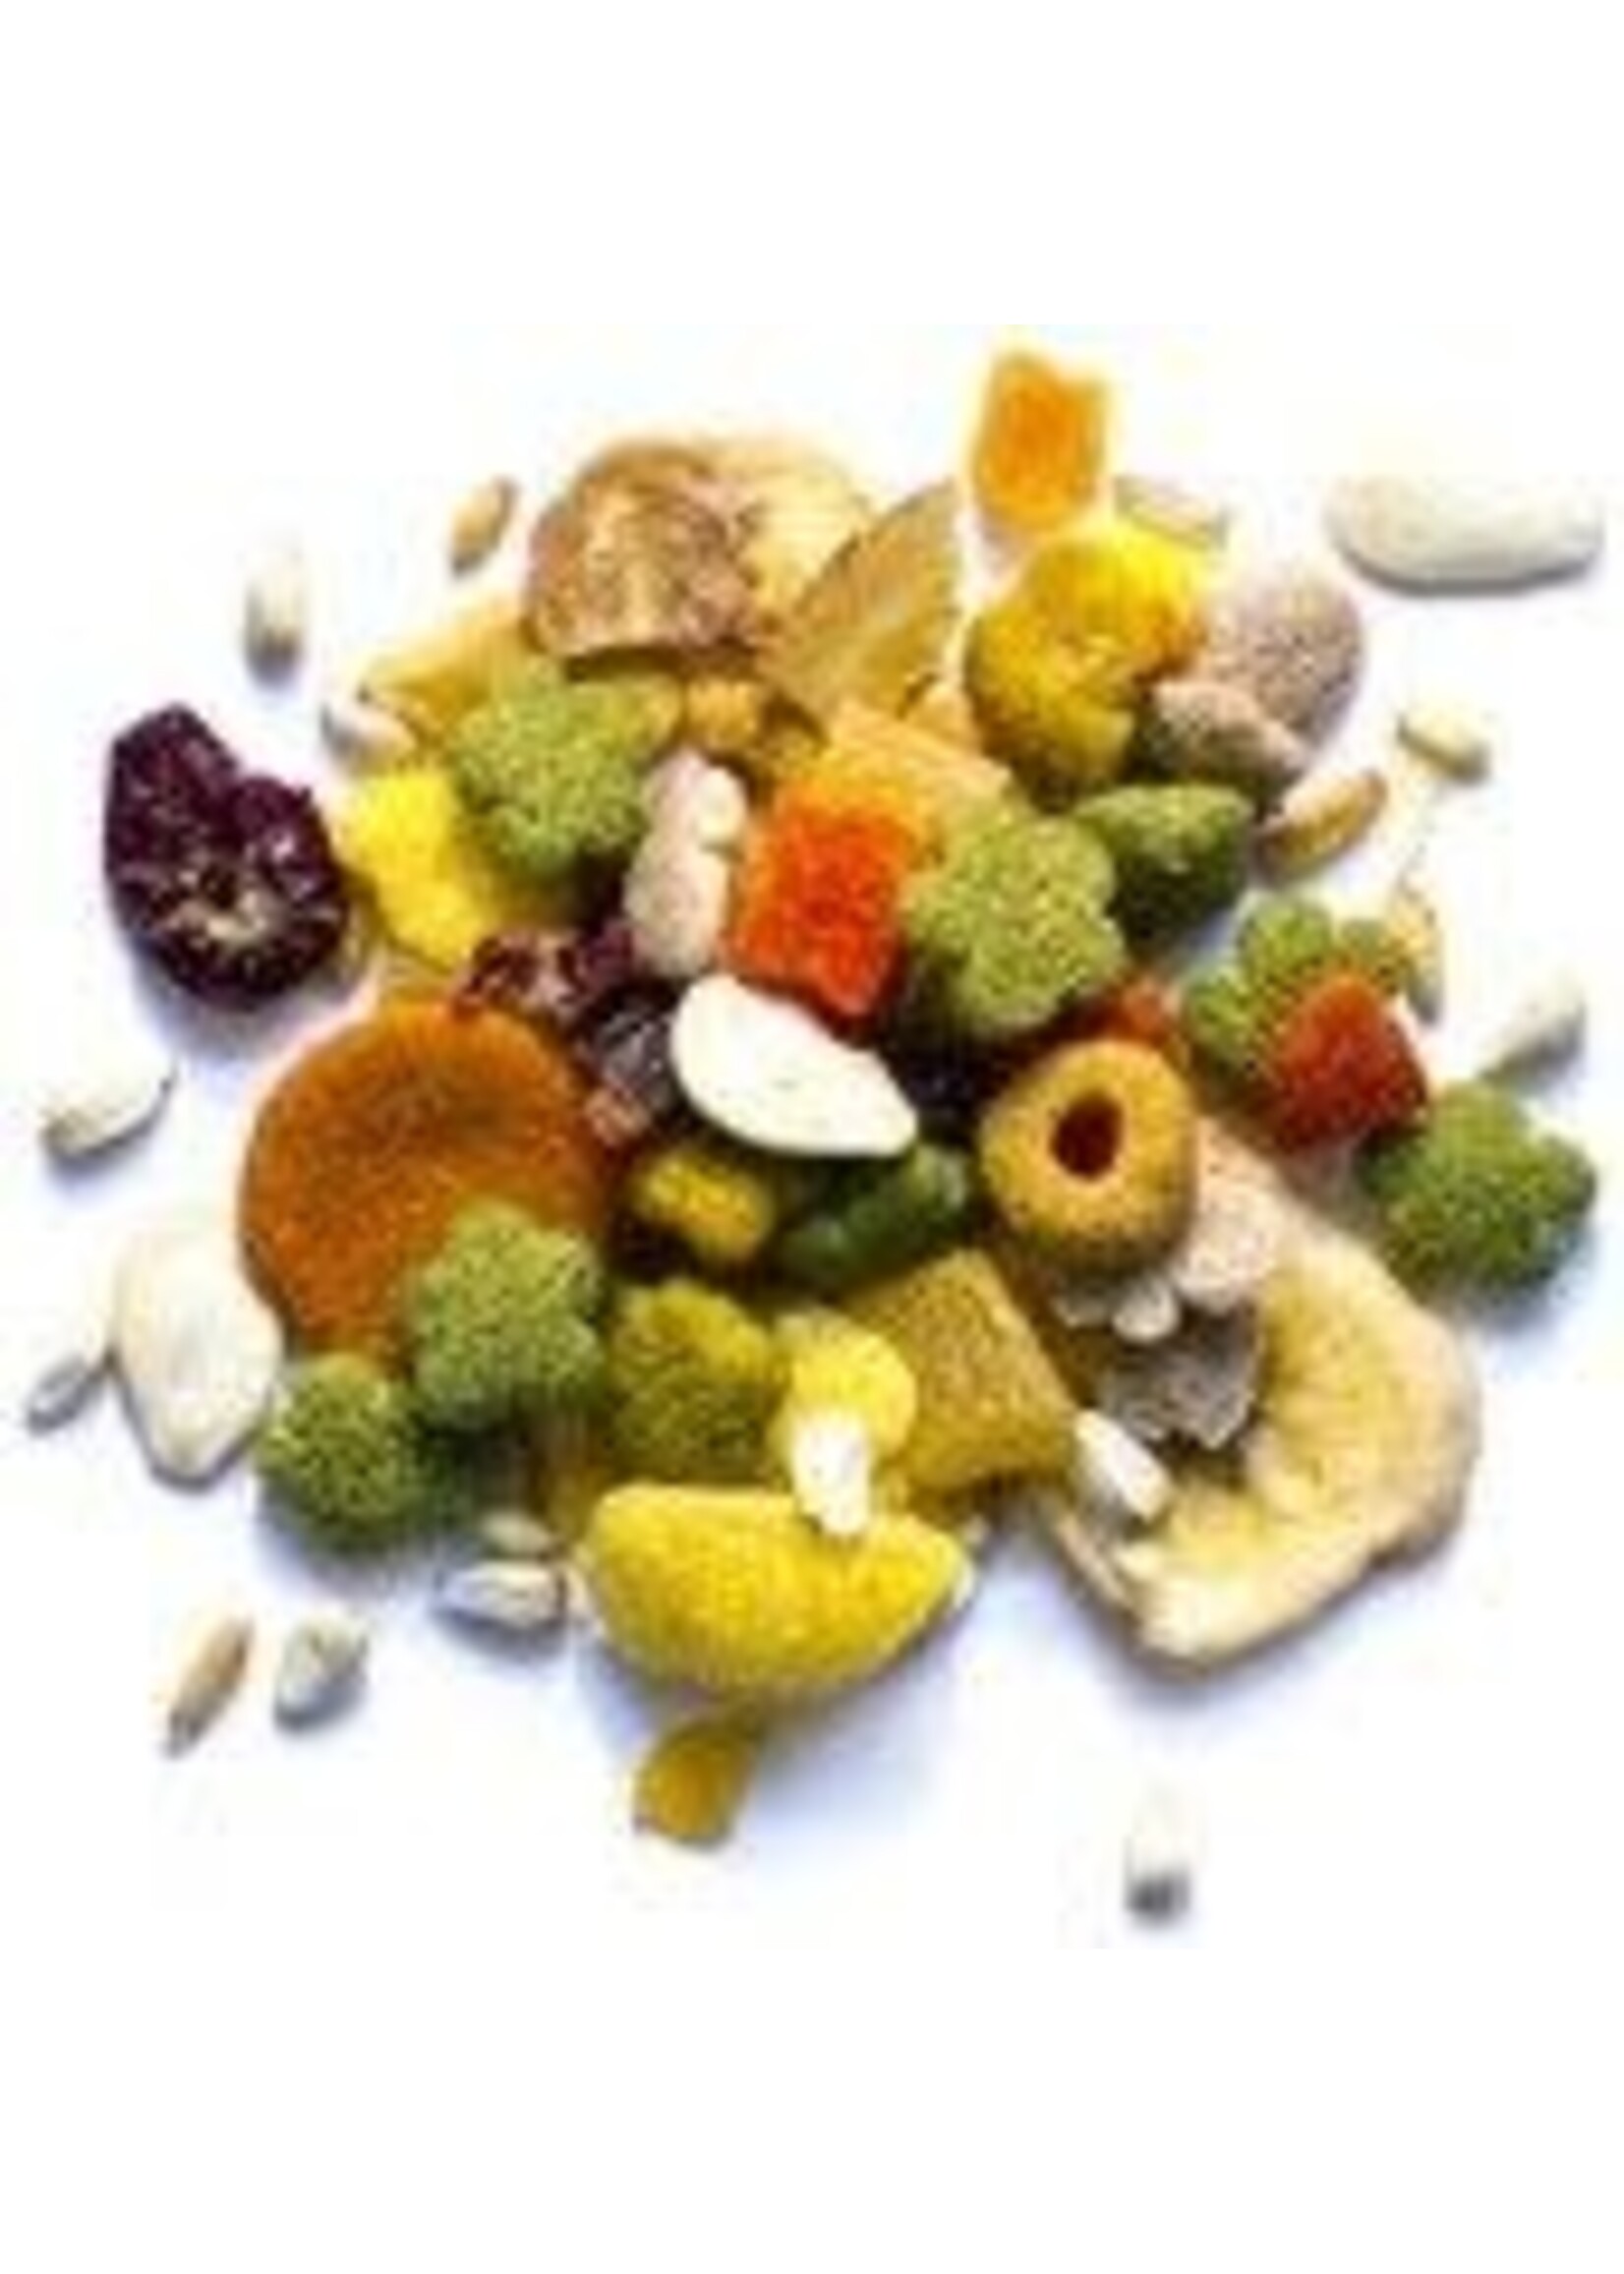 Zupreem ZuPreem "Smart Selects" Food For Finches, Canaries & Very Small Birds 2lbs 30020